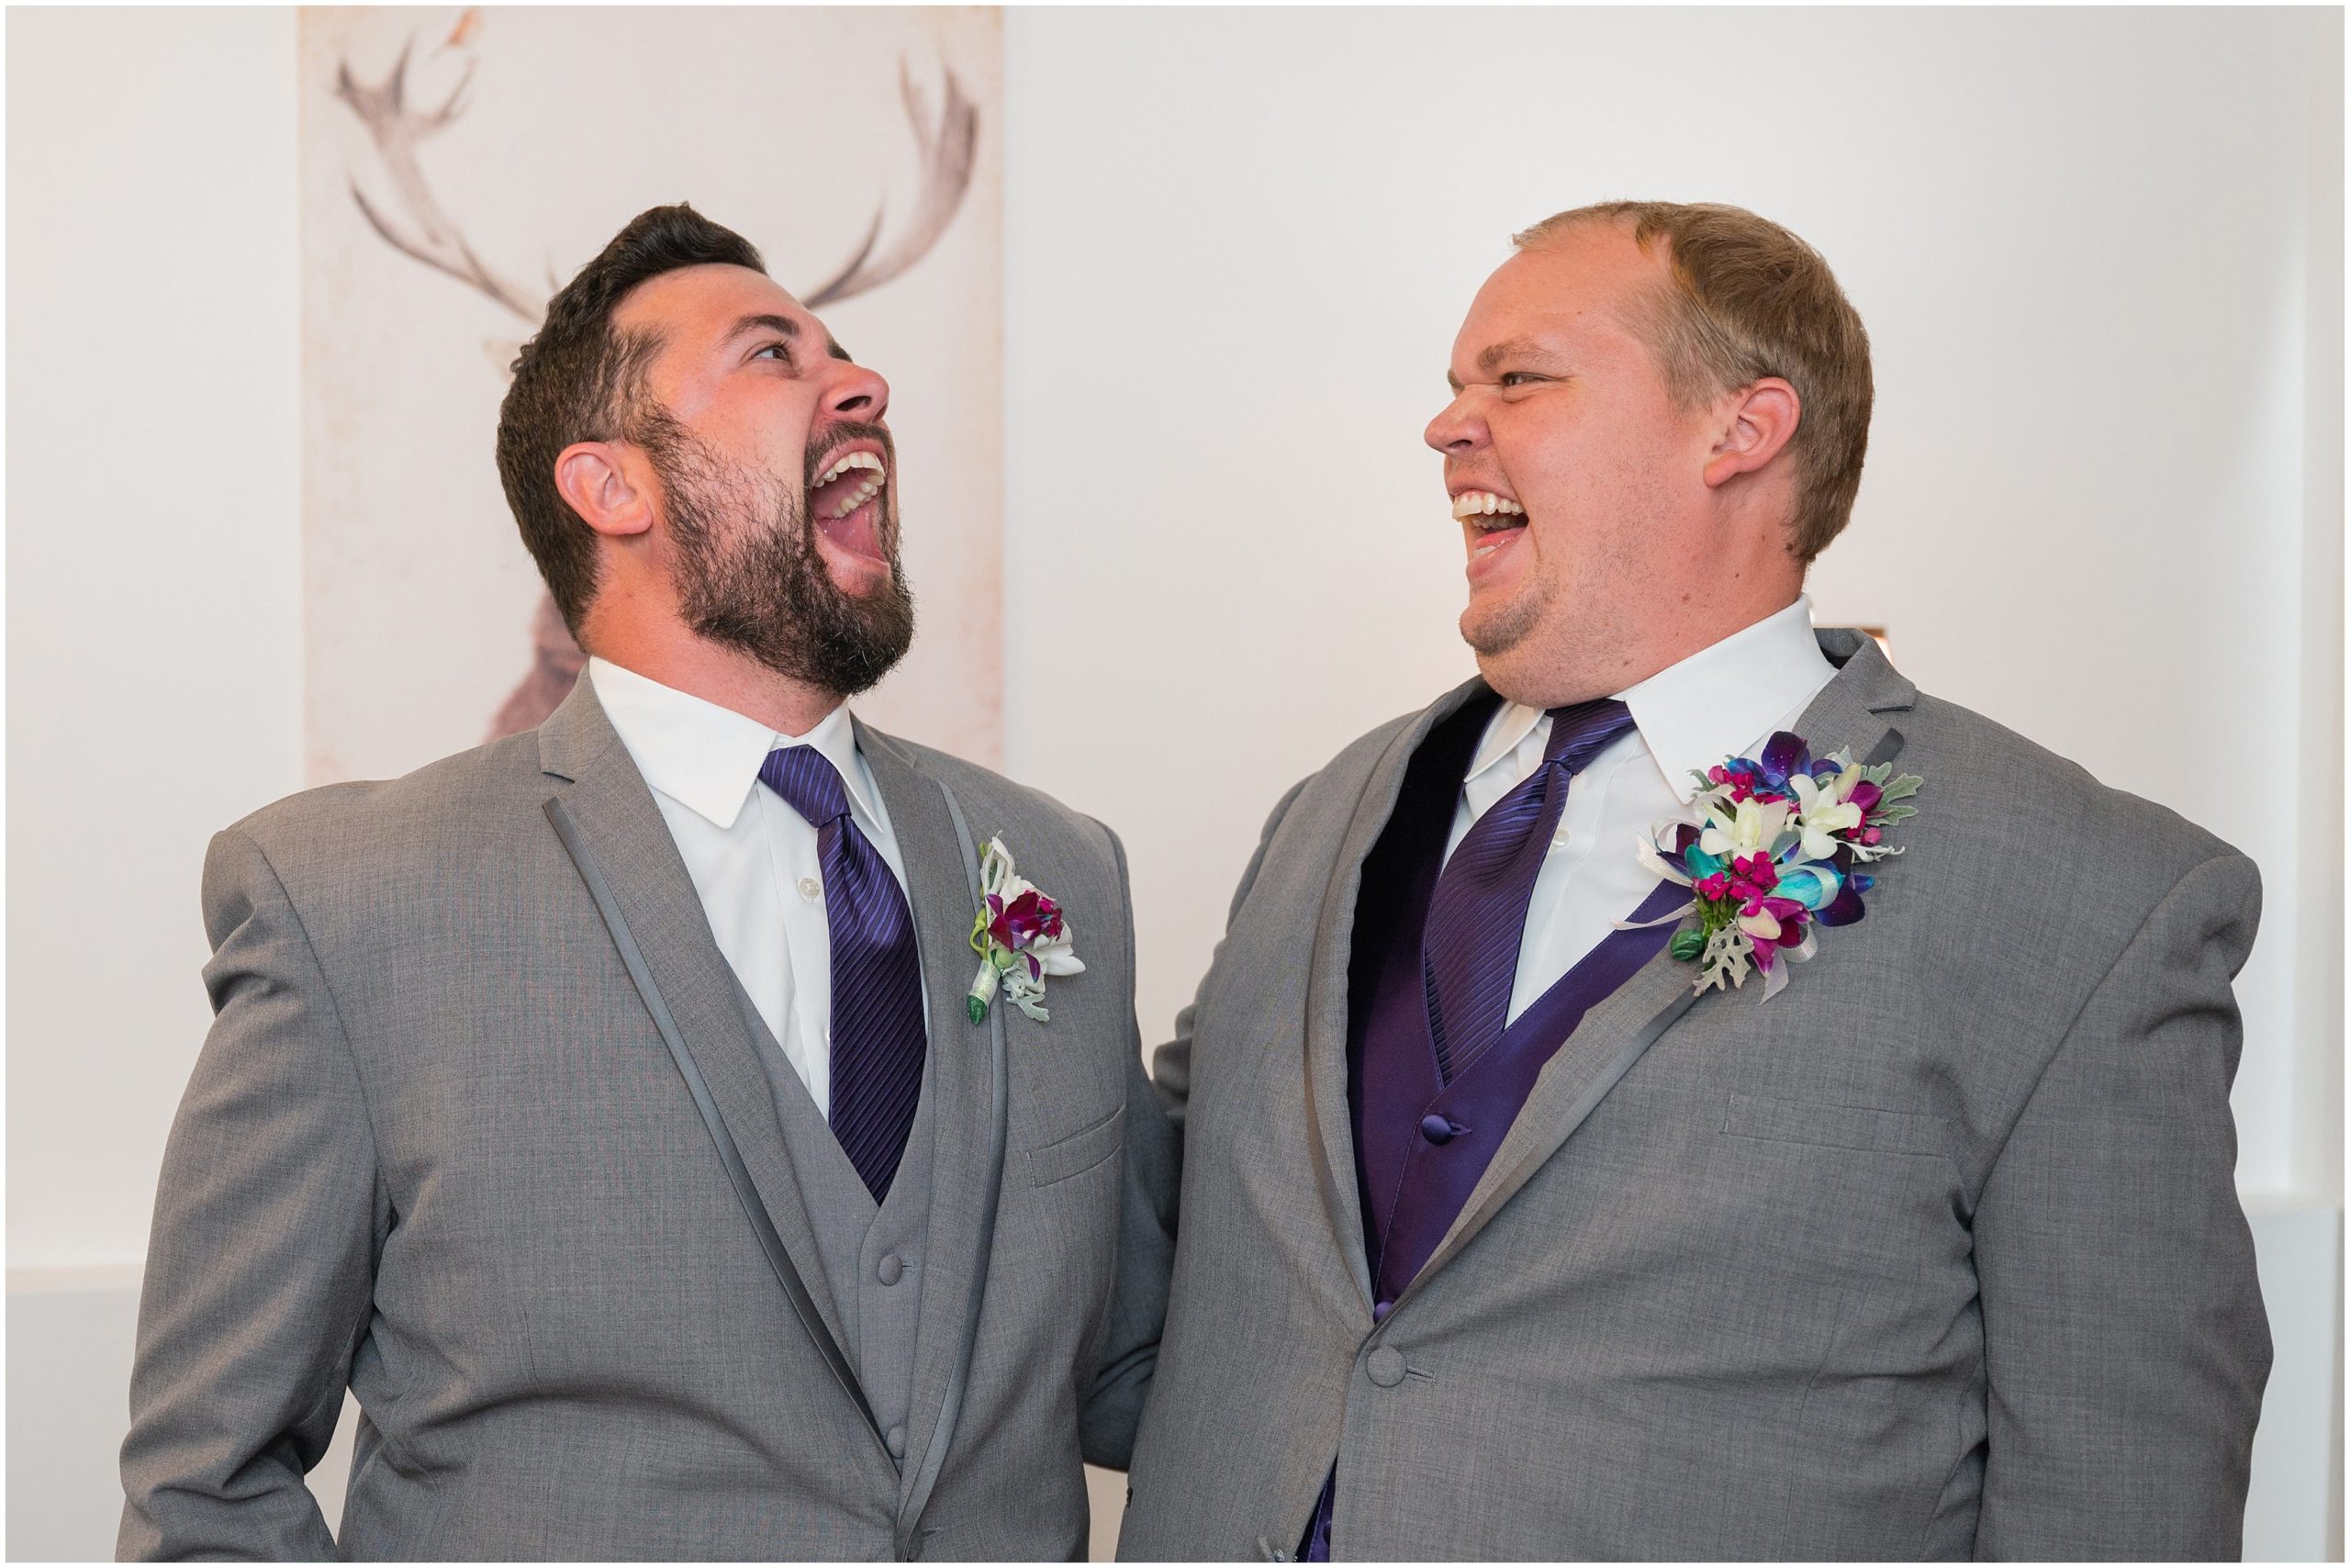 Groom and Groomsmen in grey suits getting ready | Orchid Inspired Summer Wedding at Oak Hills Utah | Jessie and Dallin Photography